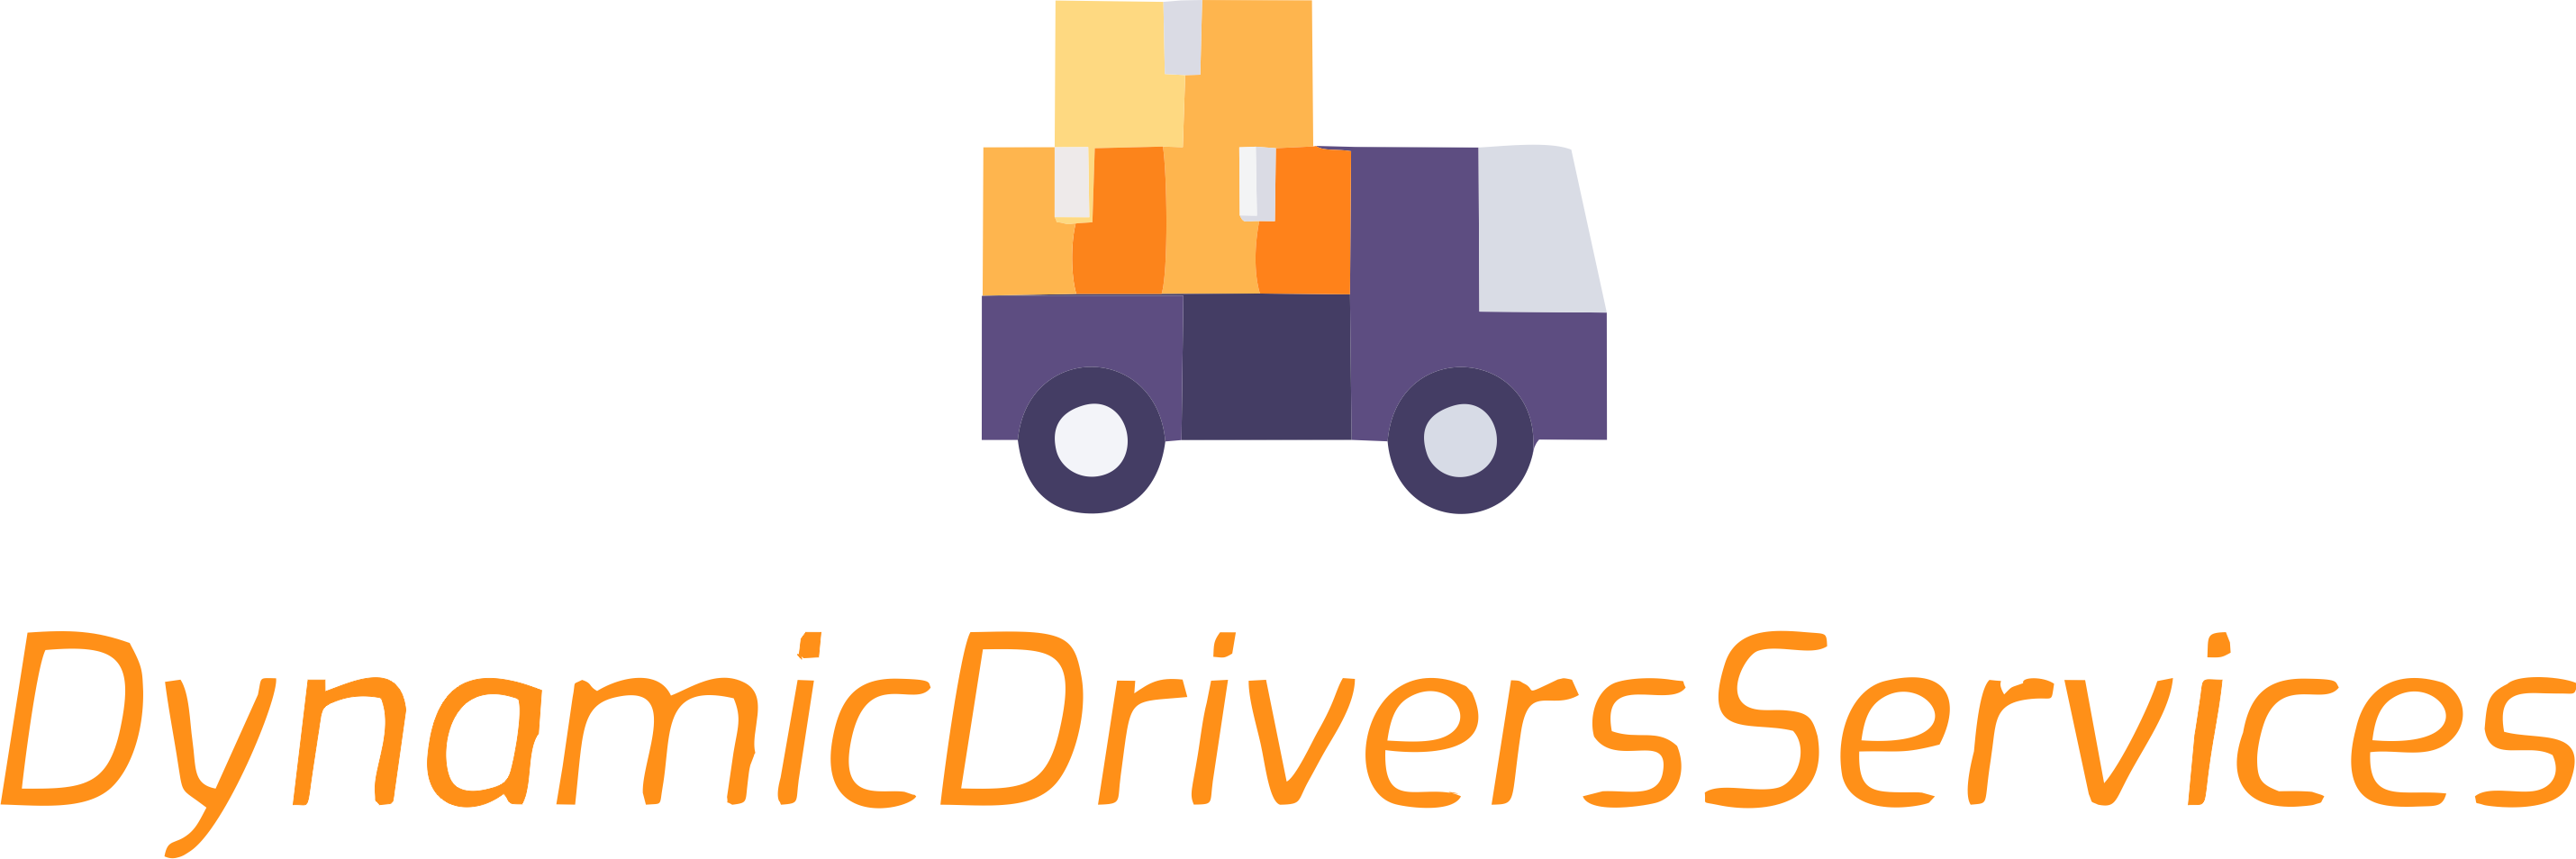 DynamicDriversServices